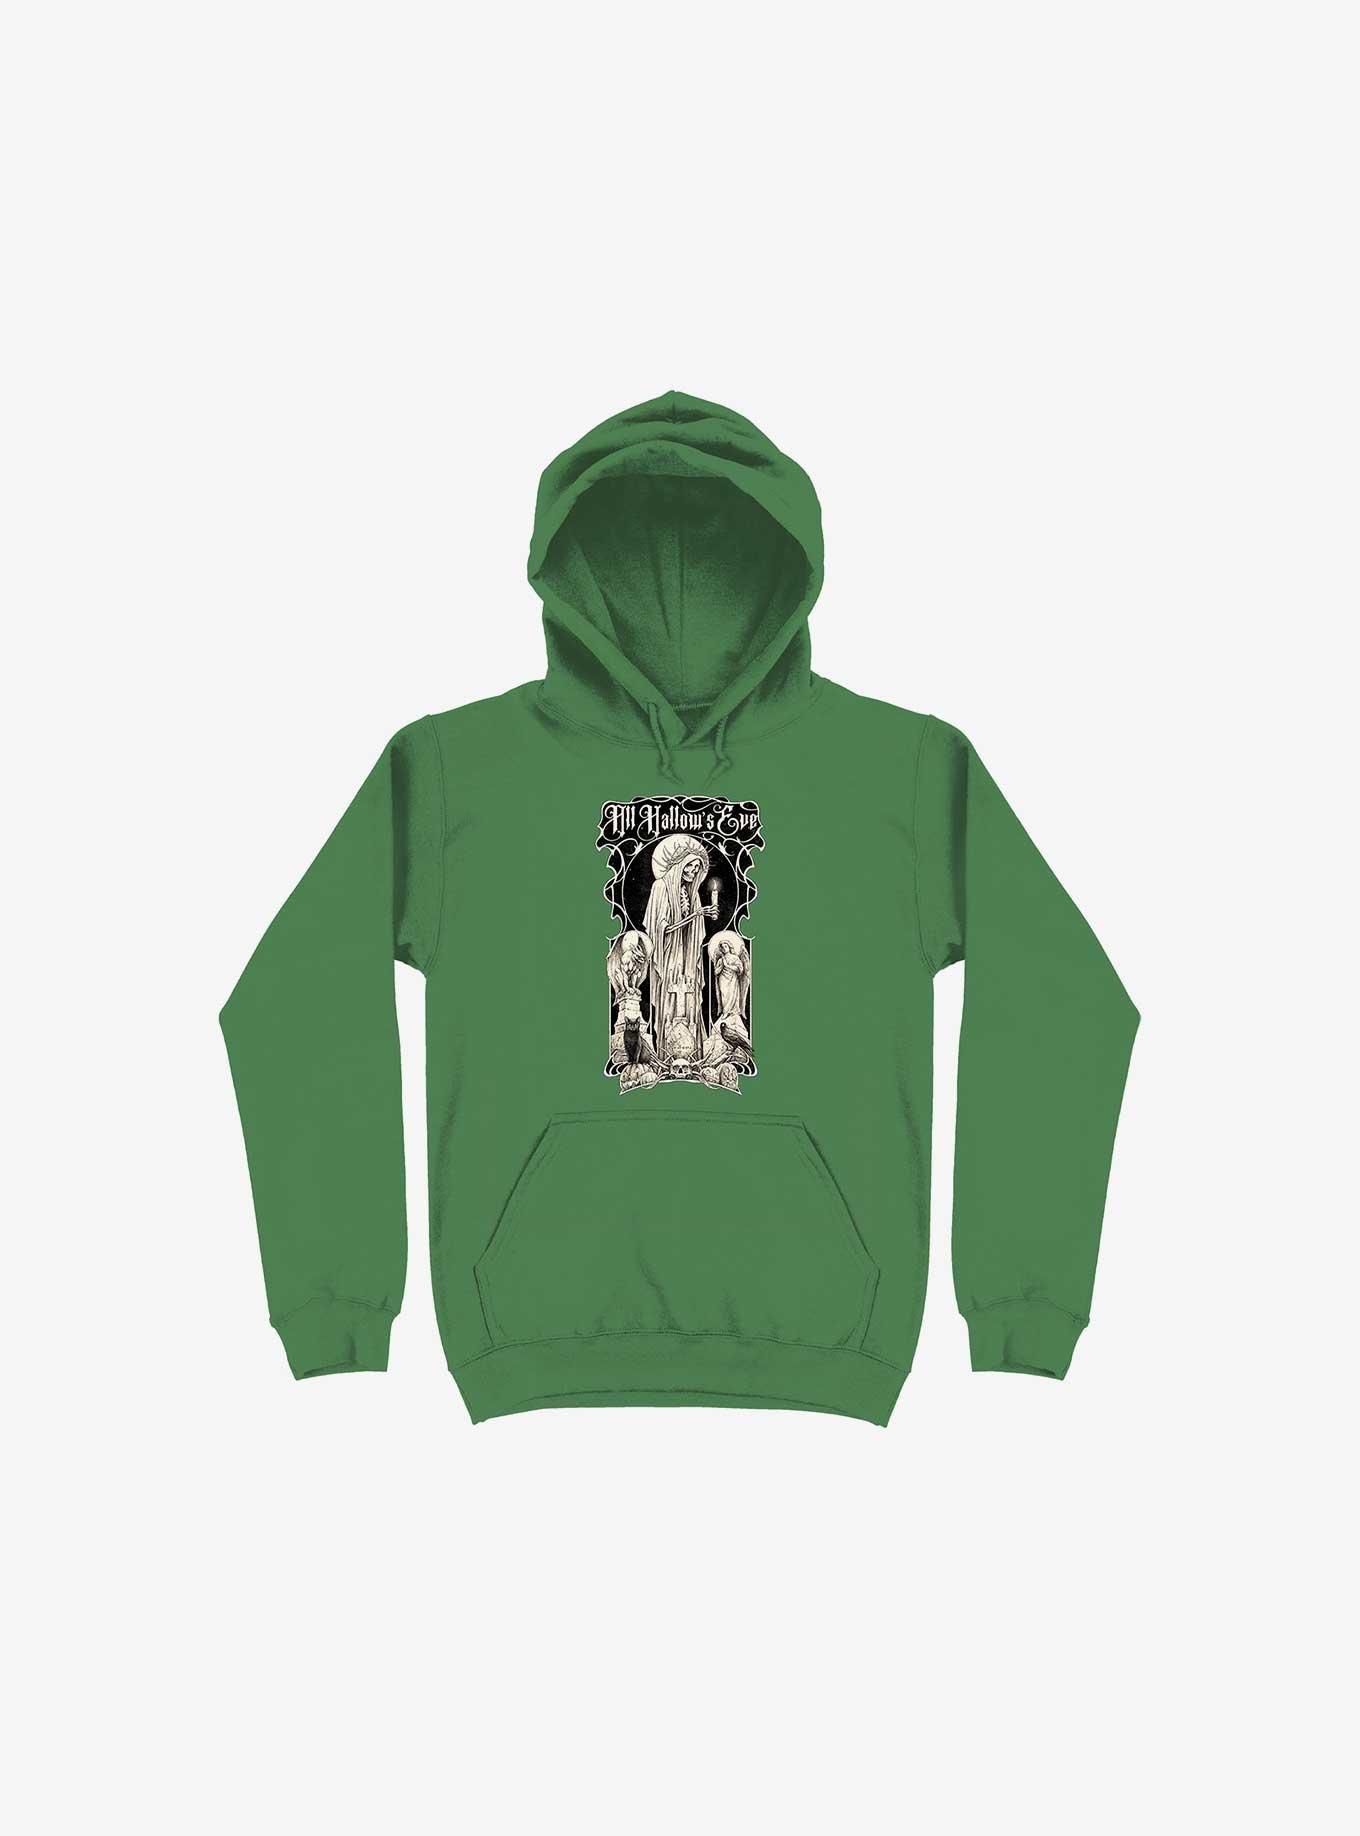 All Hallow's Eve Kelly Green Hoodie